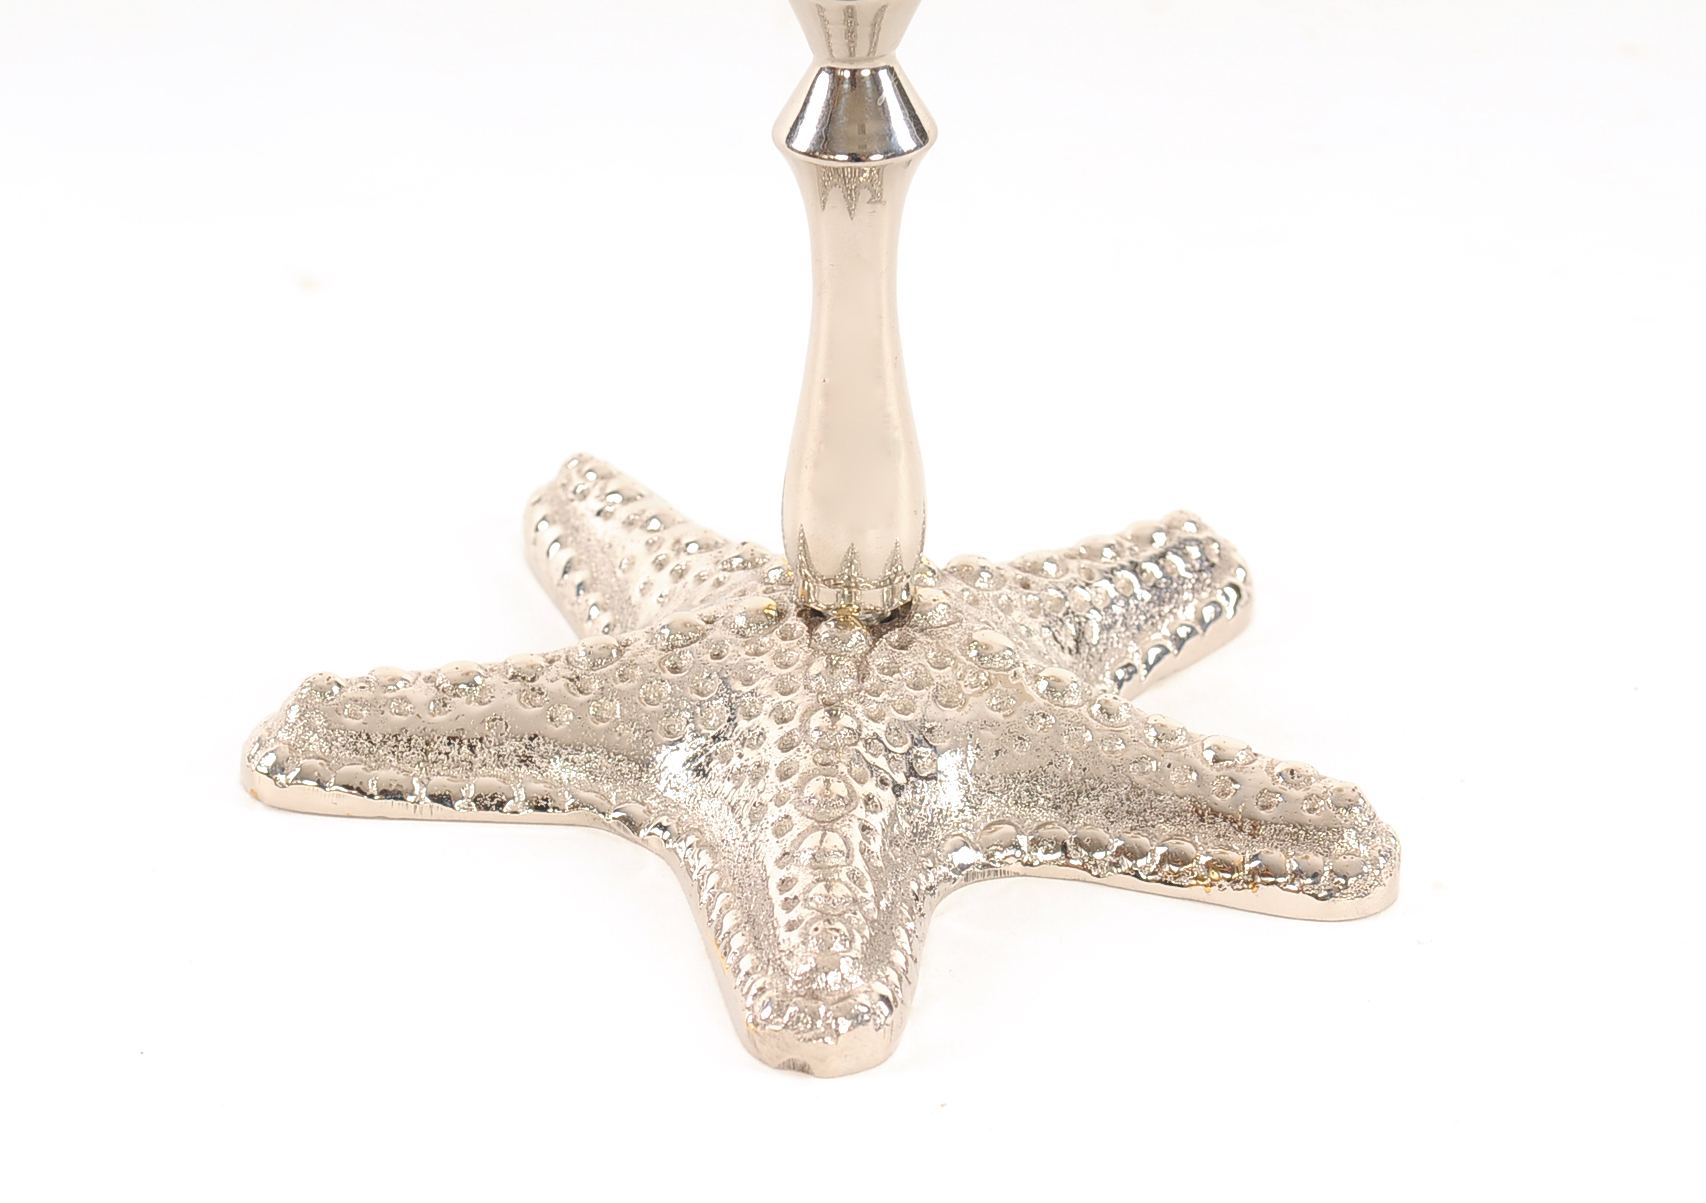 Silver Finish Star Fish Taper Candle Holder